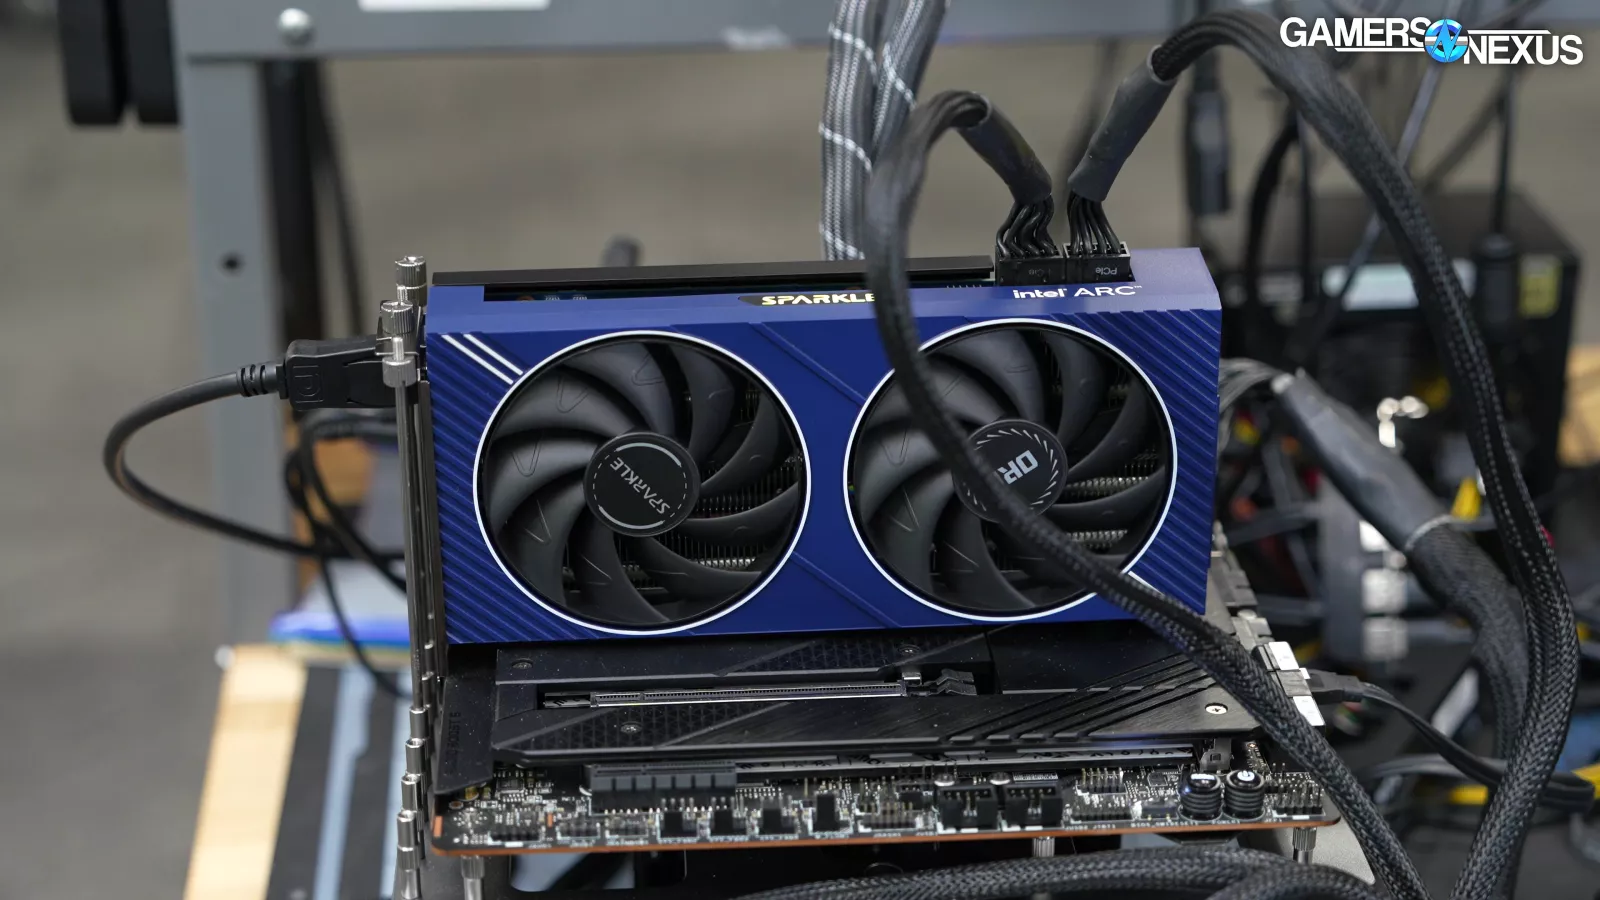 Intel Arc Goes Where NVIDIA Won't: A580 GPU Benchmarks & Review vs. A750,  RX 6600, & More